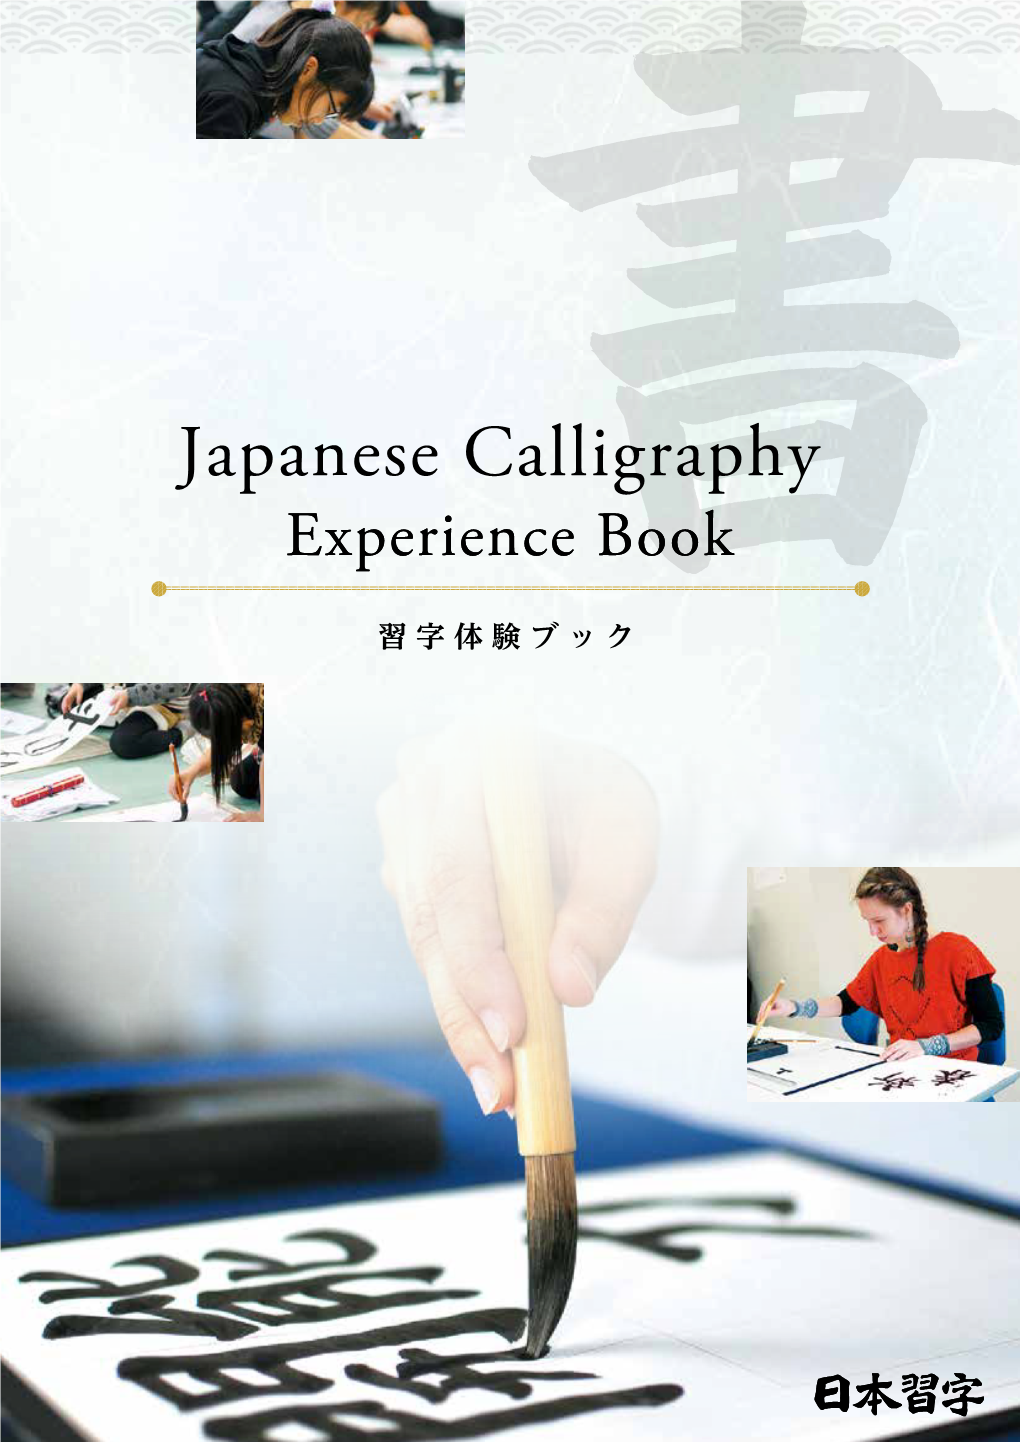 Japanese Calligraphy, As Well As Contributing to International Exchange